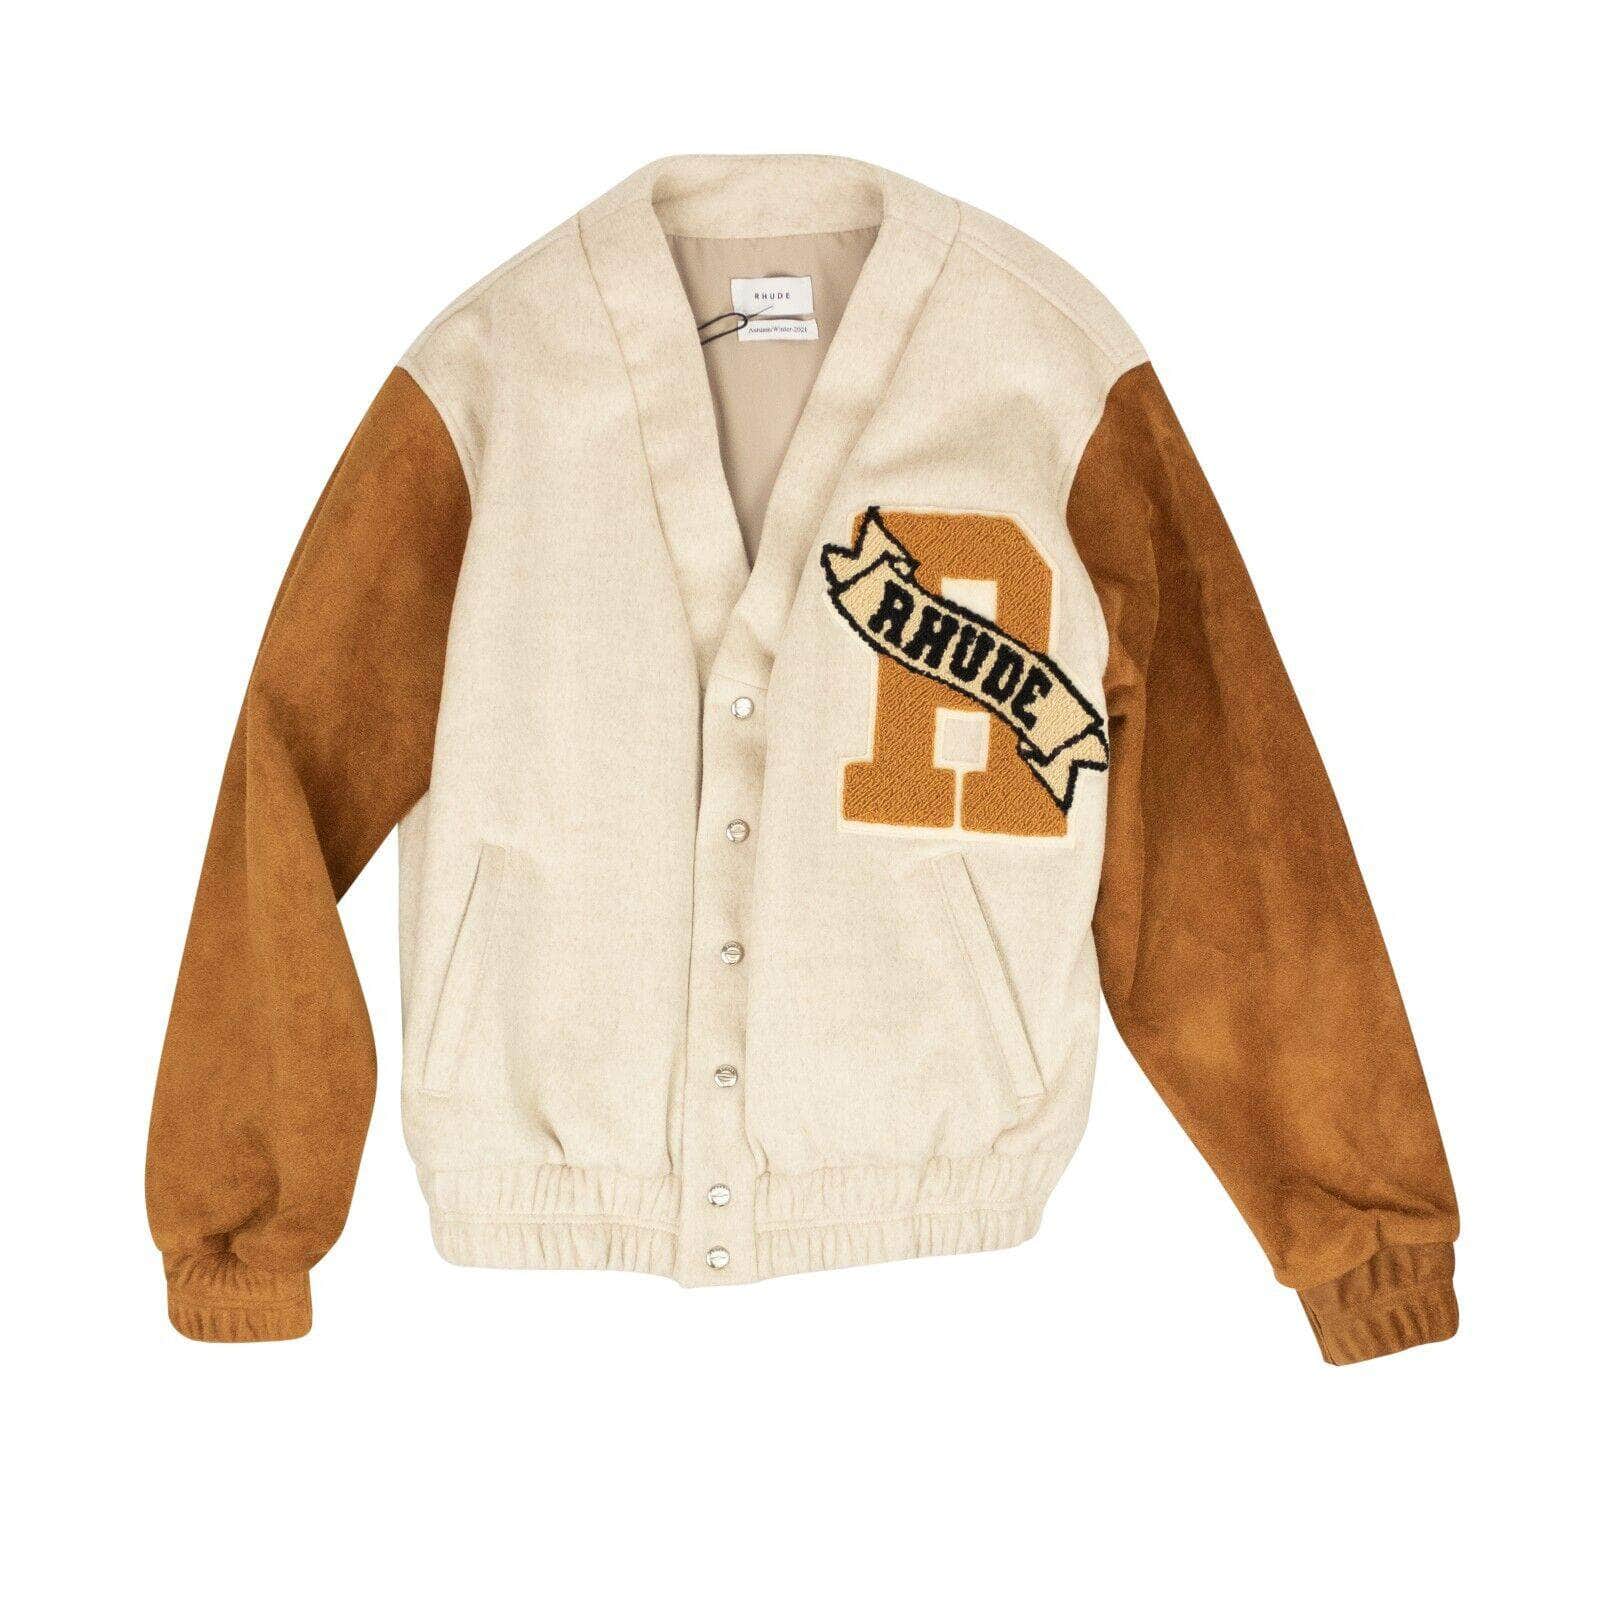 Rhude 1000-2000, channelenable-all, chicmi, couponcollection, gender-mens, main-clothing, mens-bombers, mens-shoes, rhude, shop375, size-l Beige And Tan Cardigan Bomber